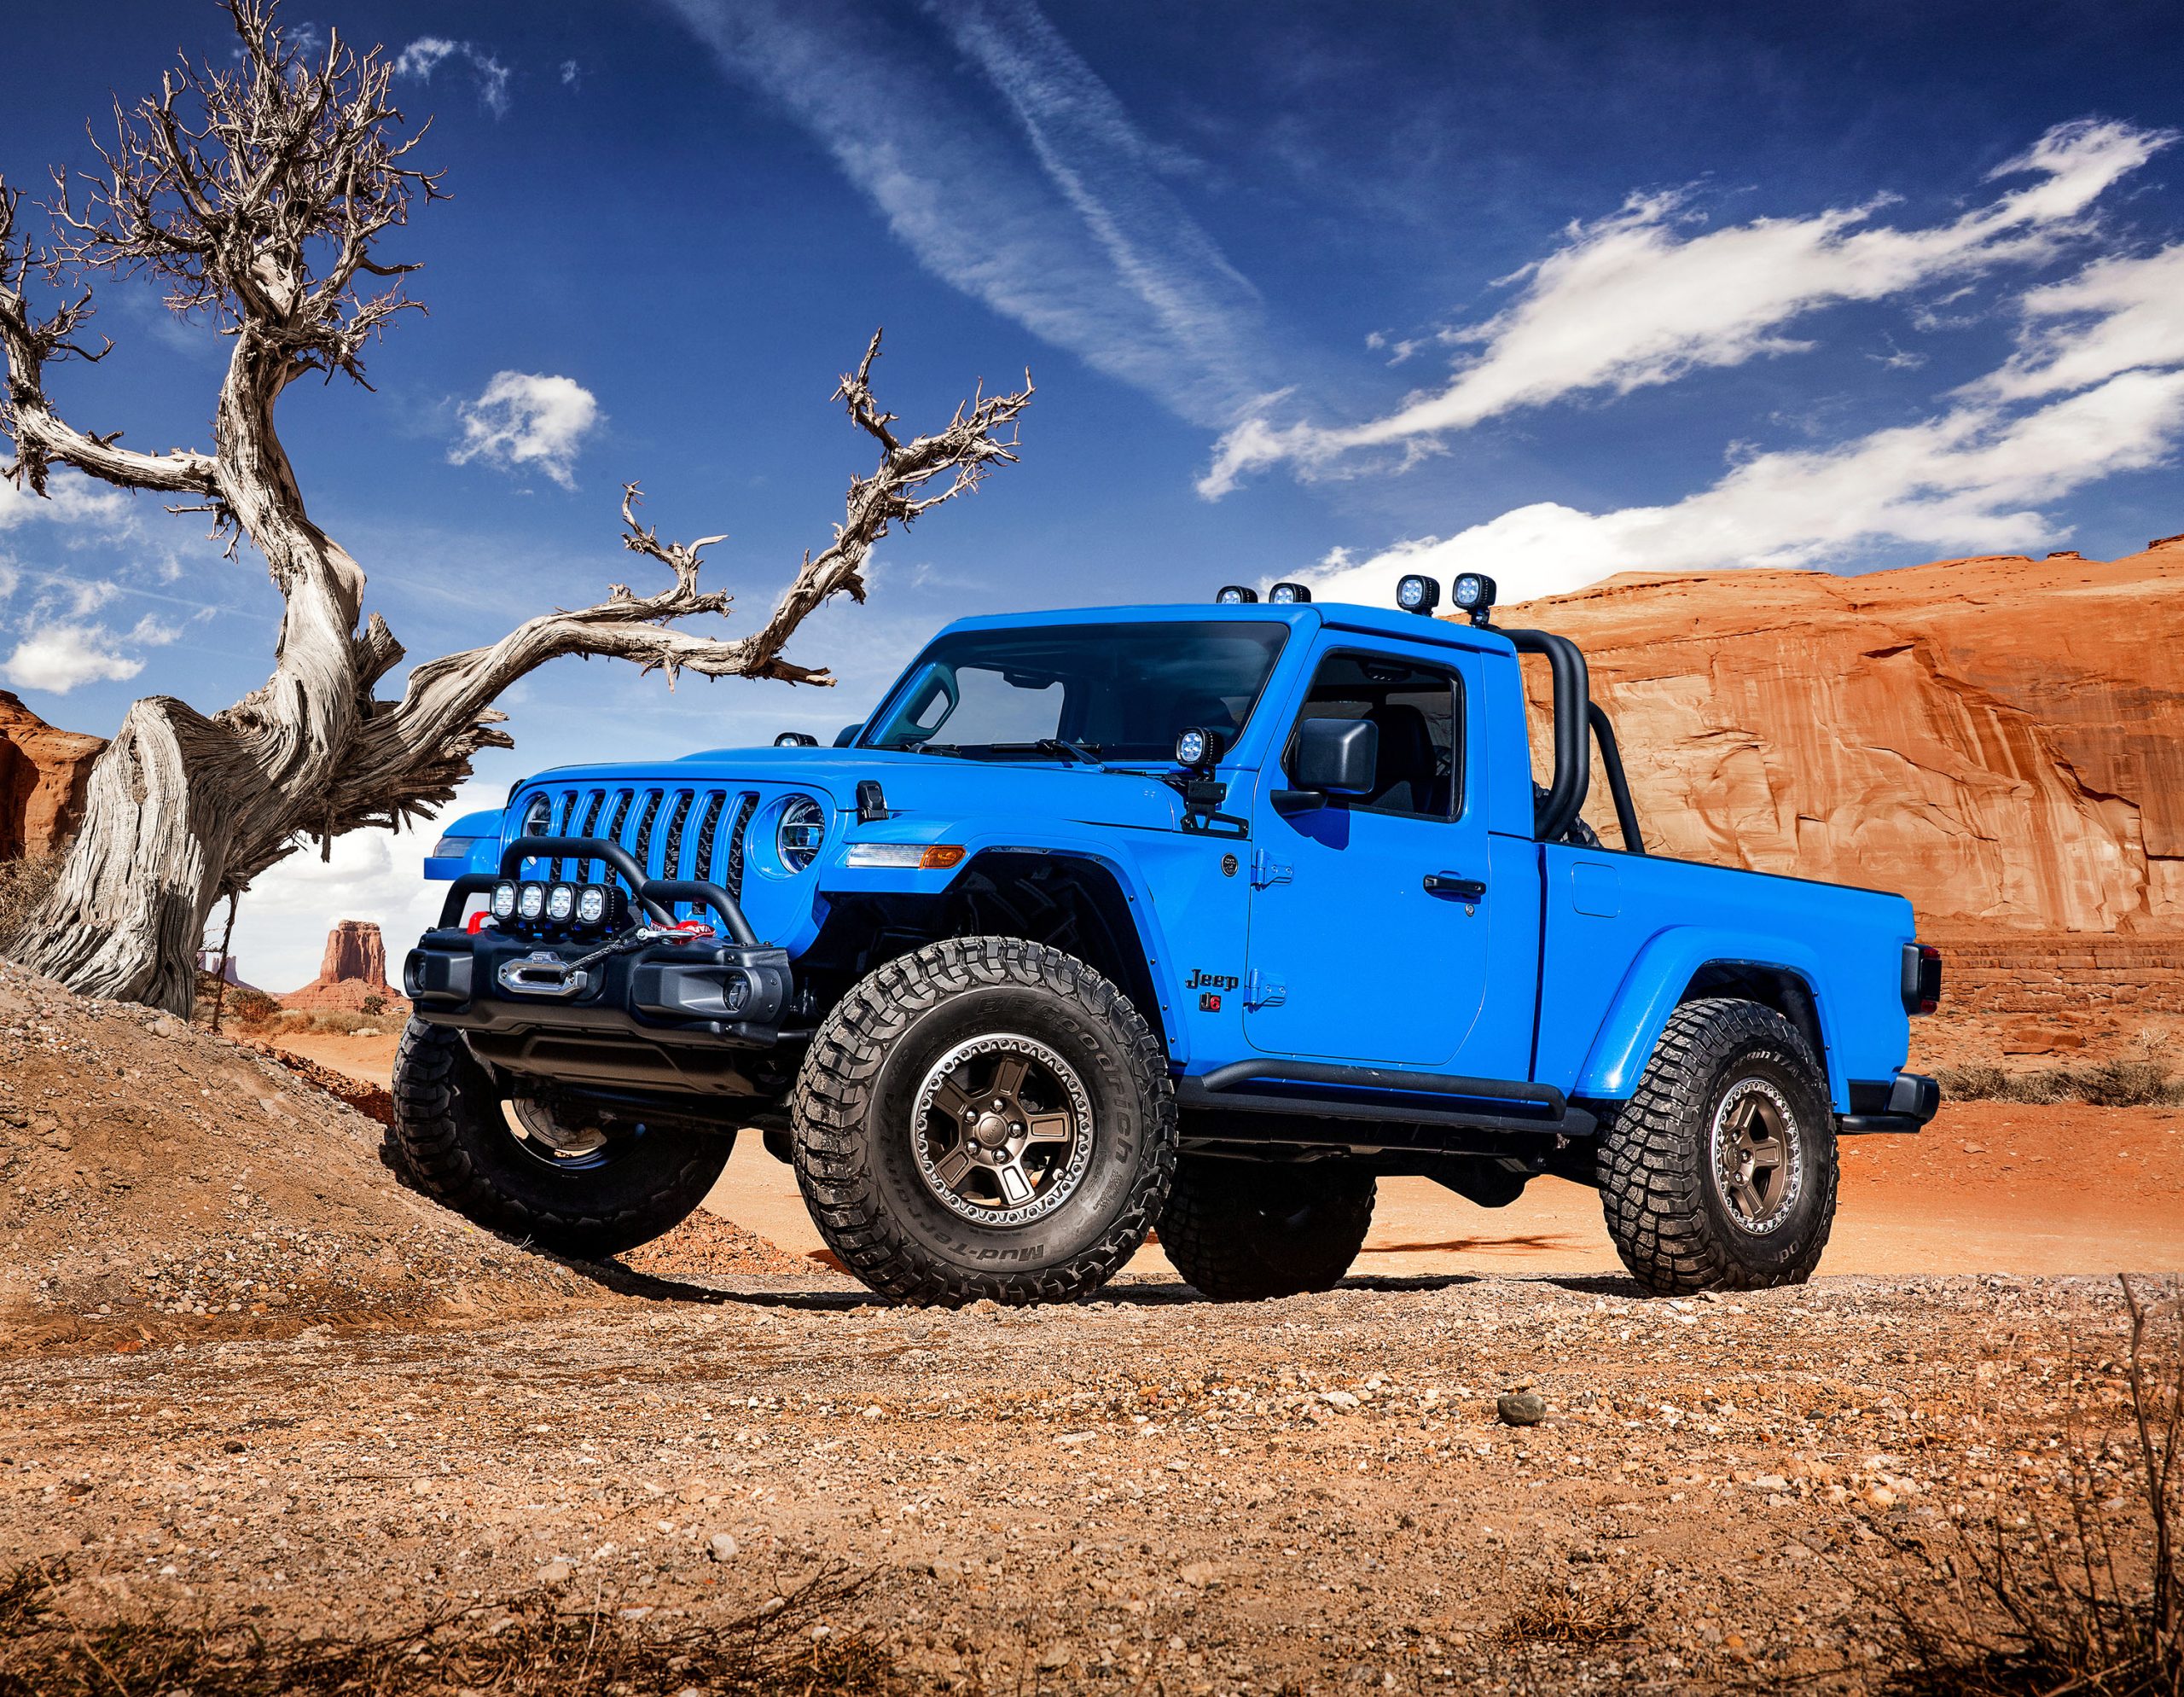 Six Jeep Concepts You Want to Hear About! – 53rd Moab Jeep Safari!!!!